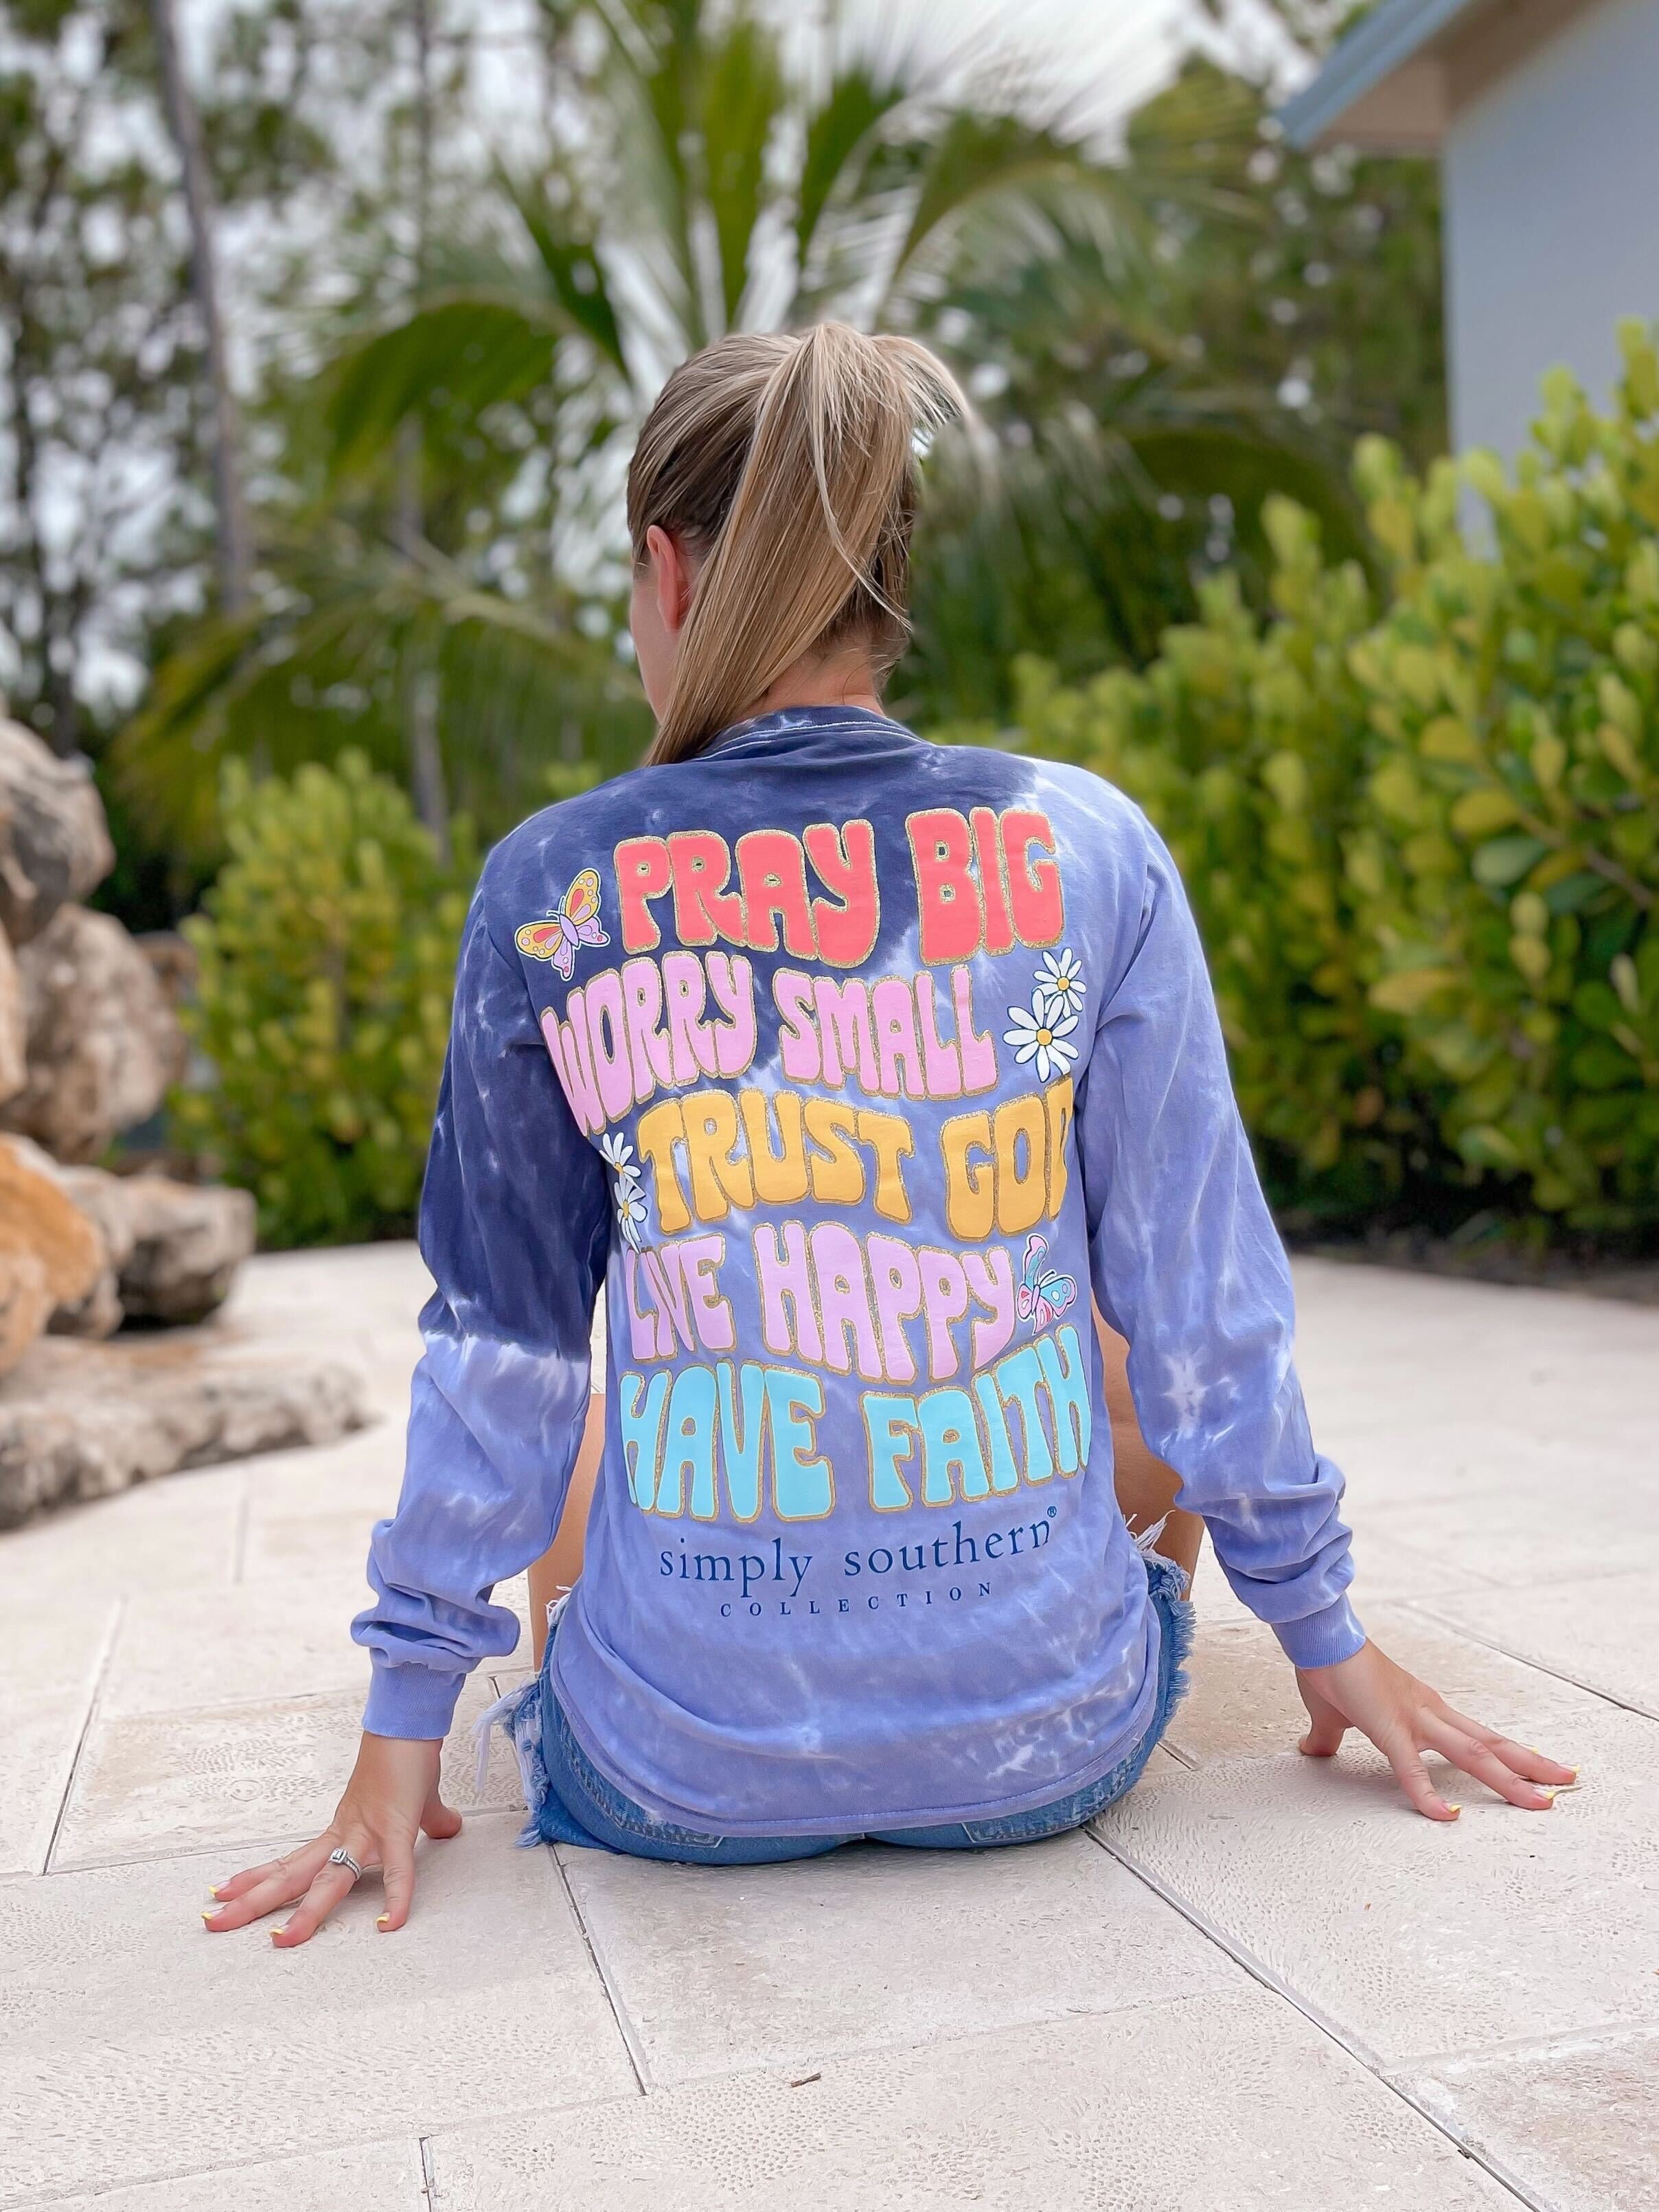 'Have Faith' Long Sleeve Tie Dye Tee by Simply Southern